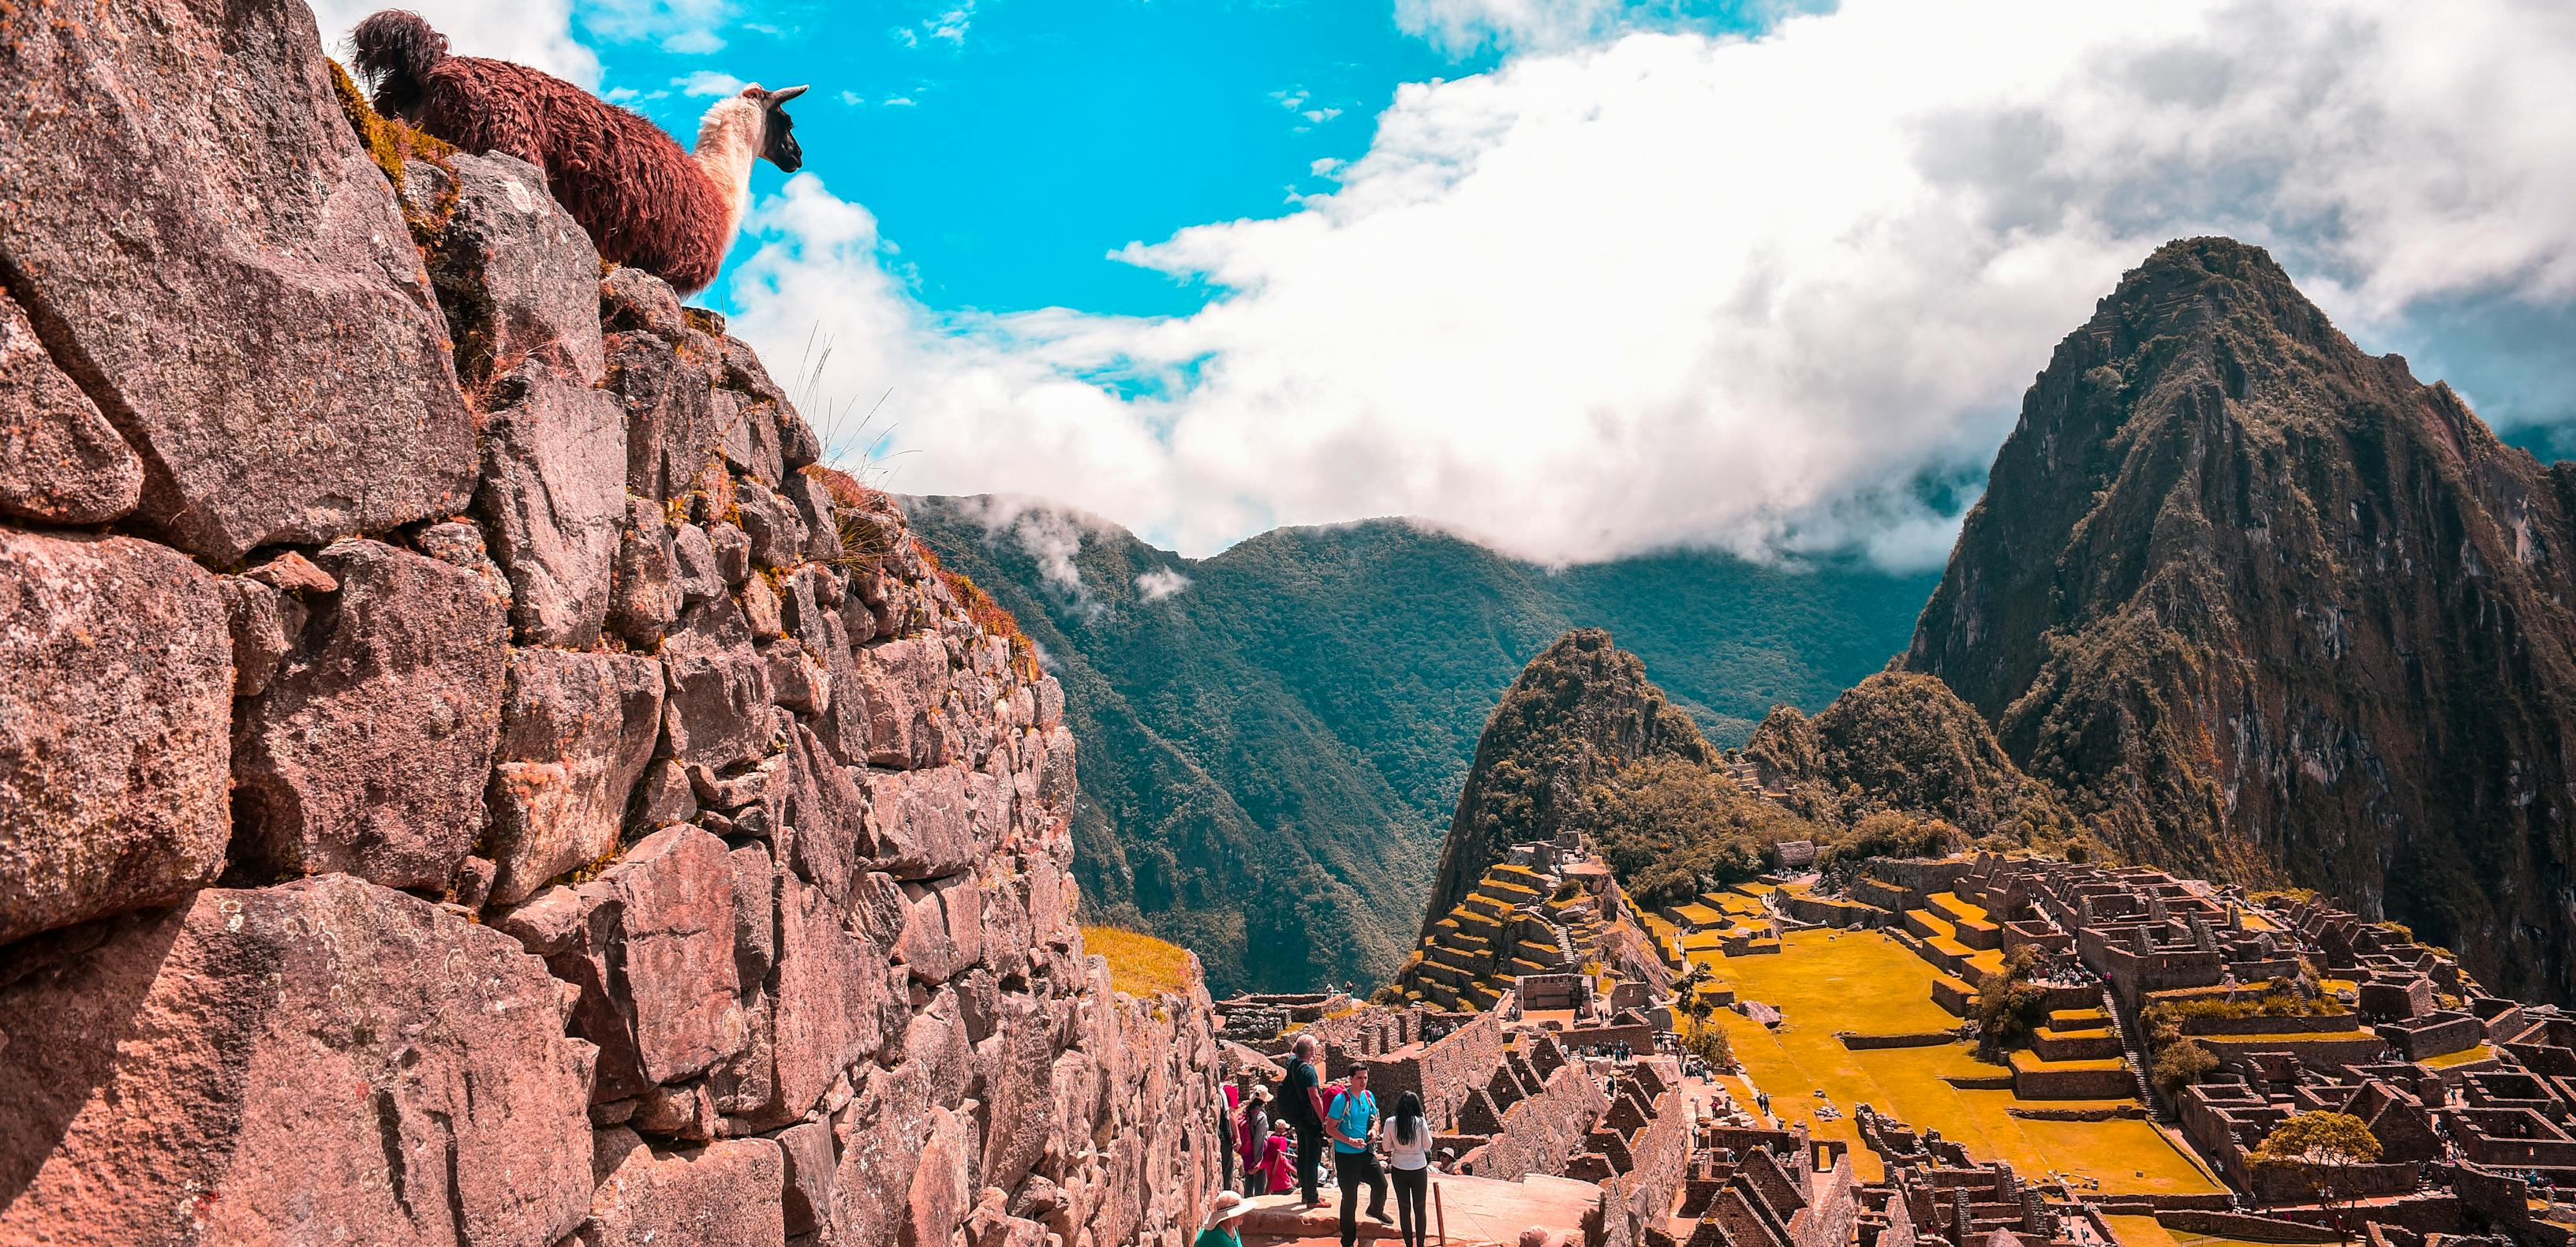 Machu Picchu airport venture will only end in ruins